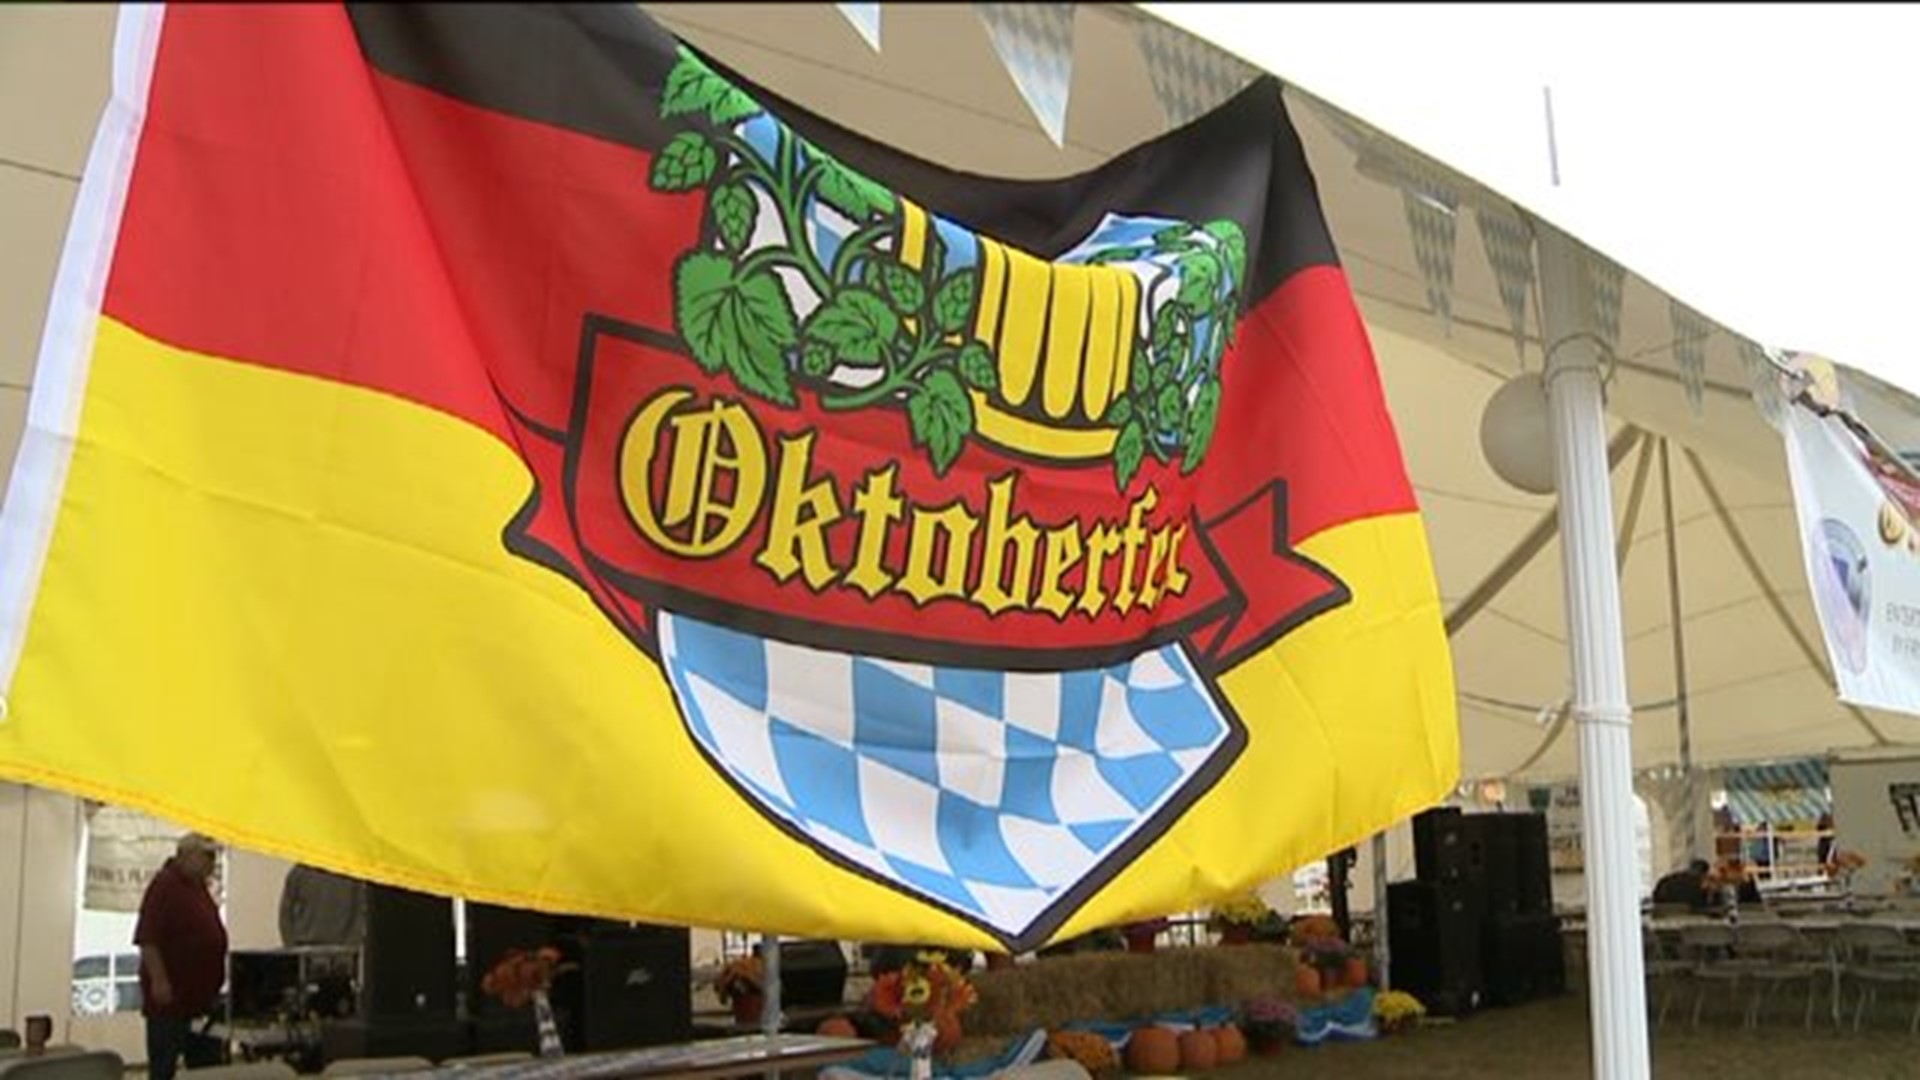 Second Annual Oktoberfest Celebration Held in Carbon County